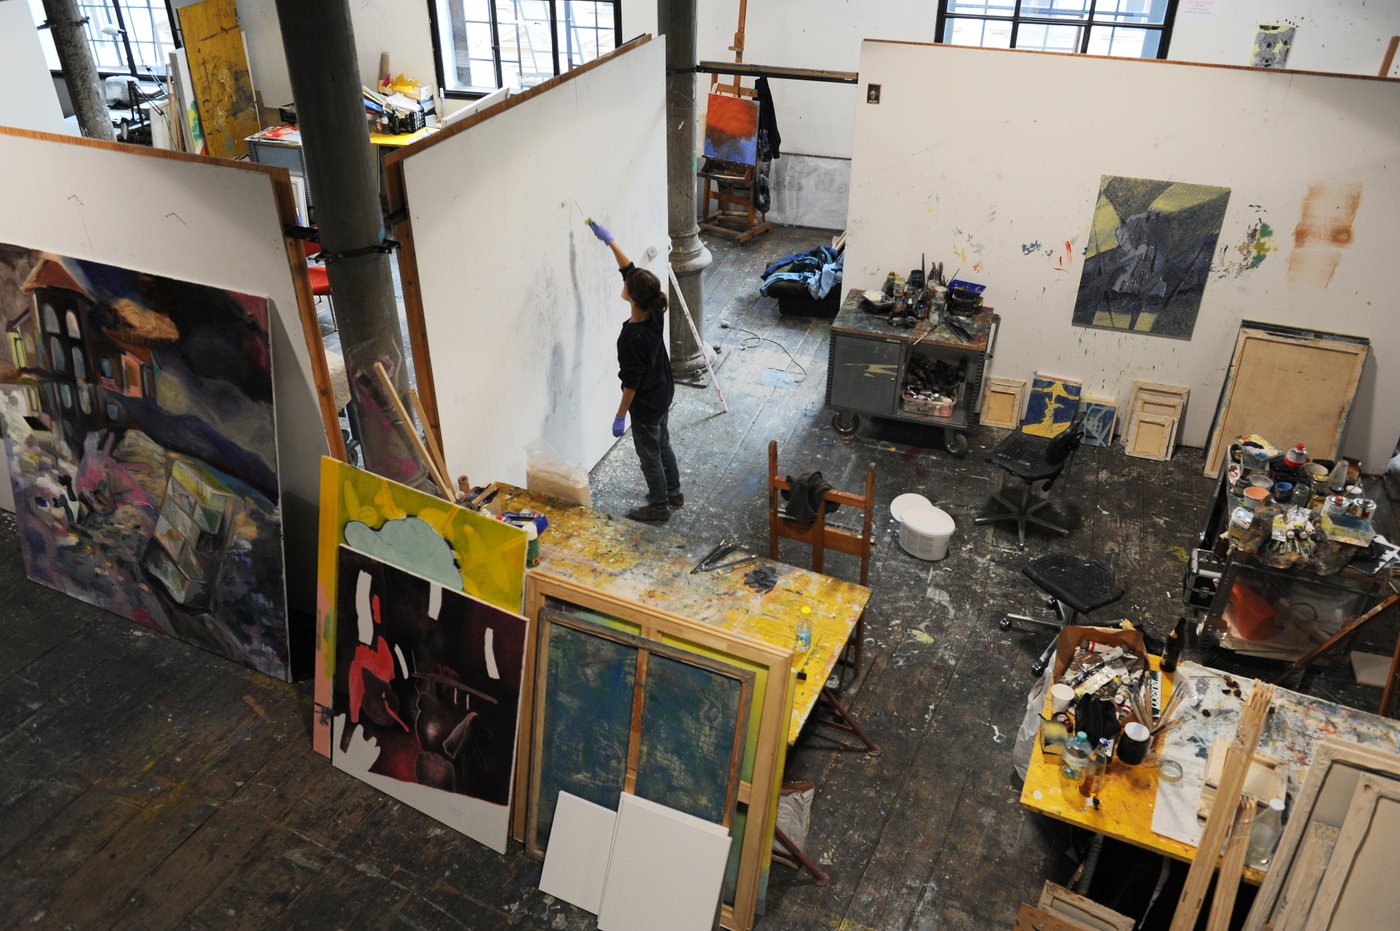 Workplace of a painter photographed from a gallery. Stacks of half-finished canvases stand around, tables with paints and brushes. The floor is littered with splashes of paint. A student in black clothes stands in front of a white wall and draws.